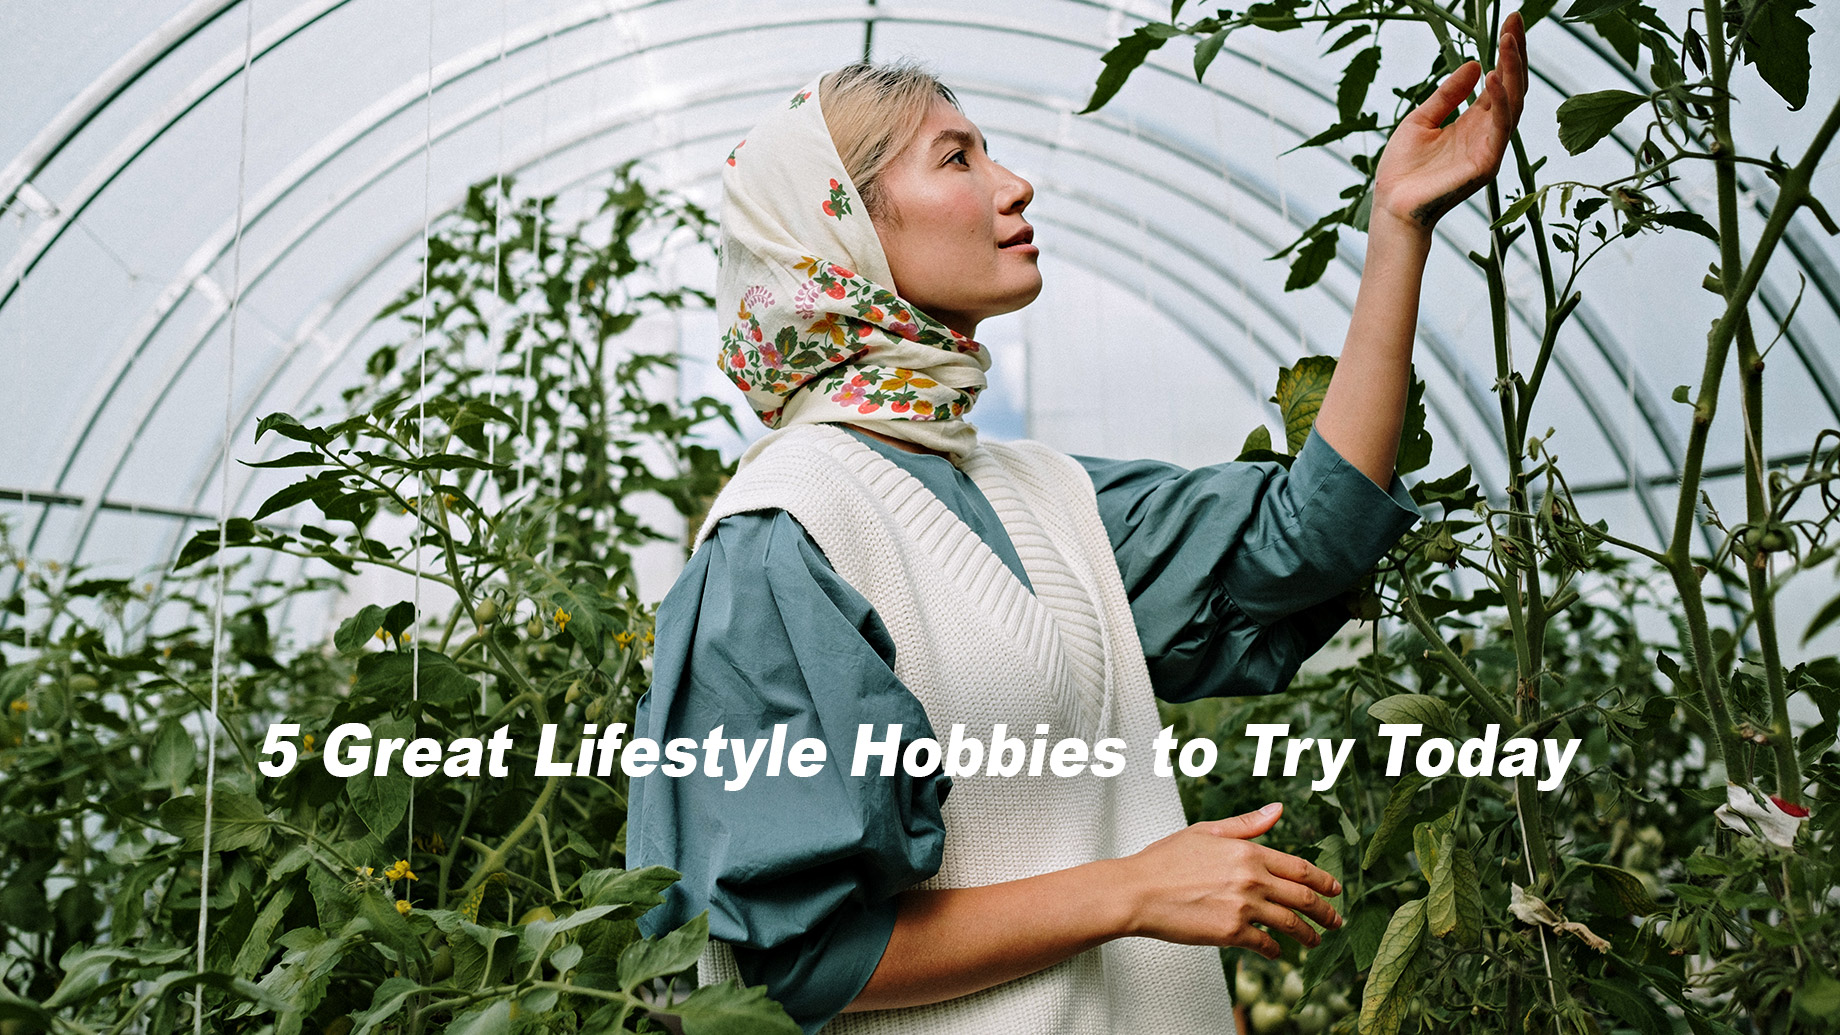 5 Great Lifestyle Hobbies to Try Today